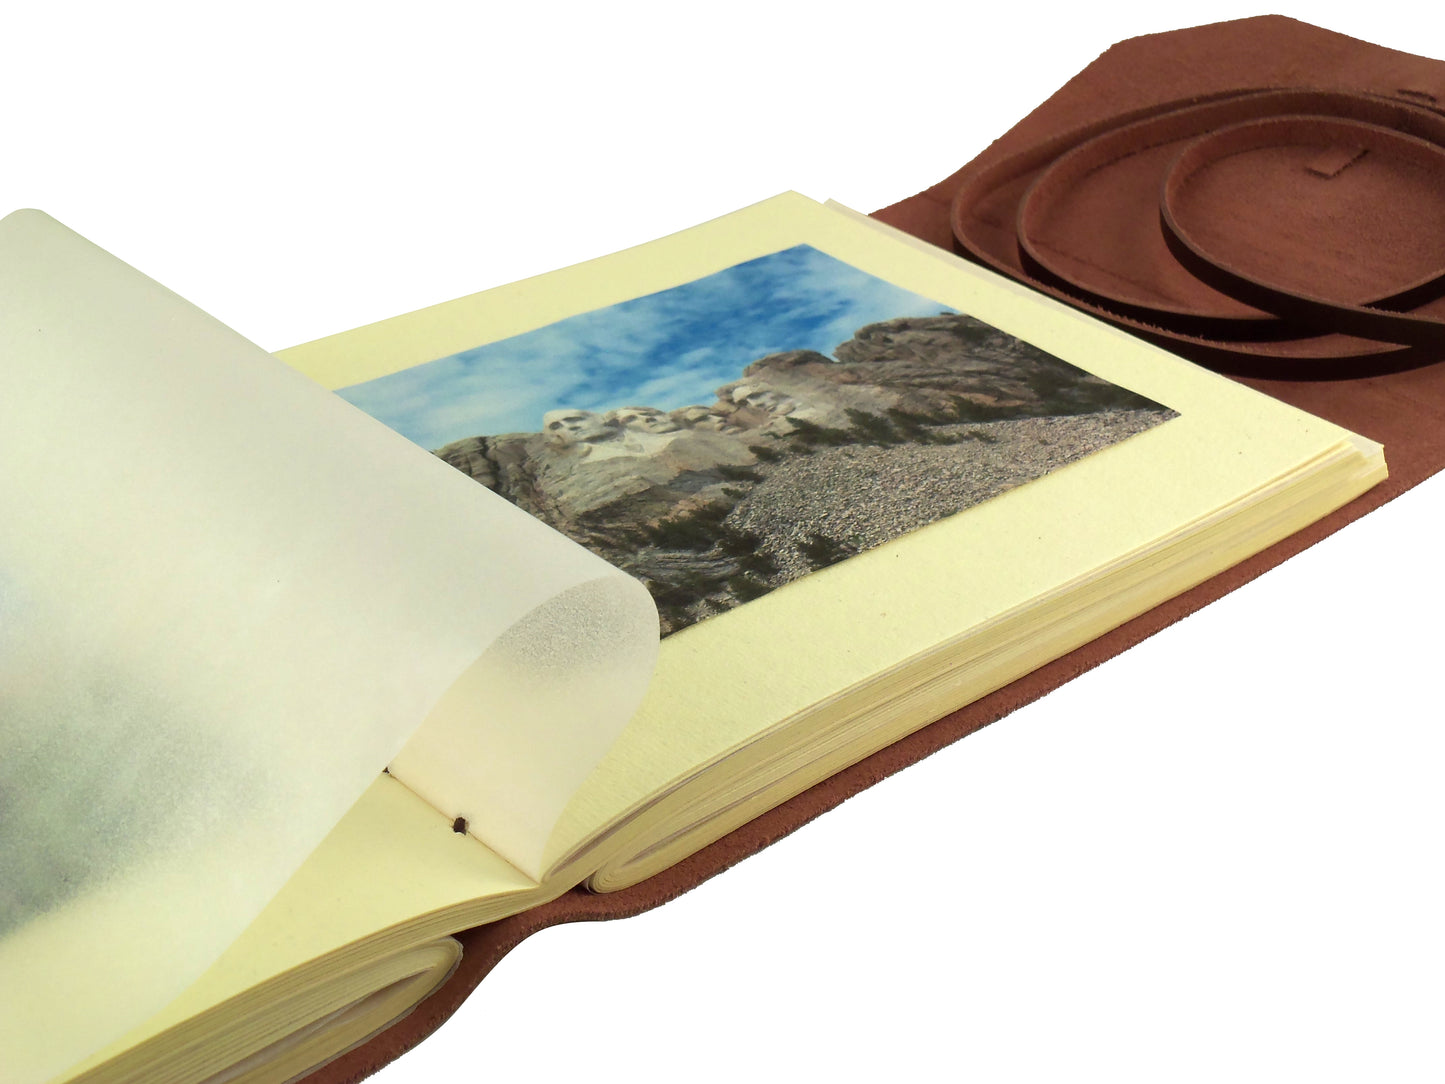 Rustic Leather Coffee Table Photo Album with Gift Box - Holds 100 4x6 or 5x7 Photos - 6x8" - Rustic Ridge Leather